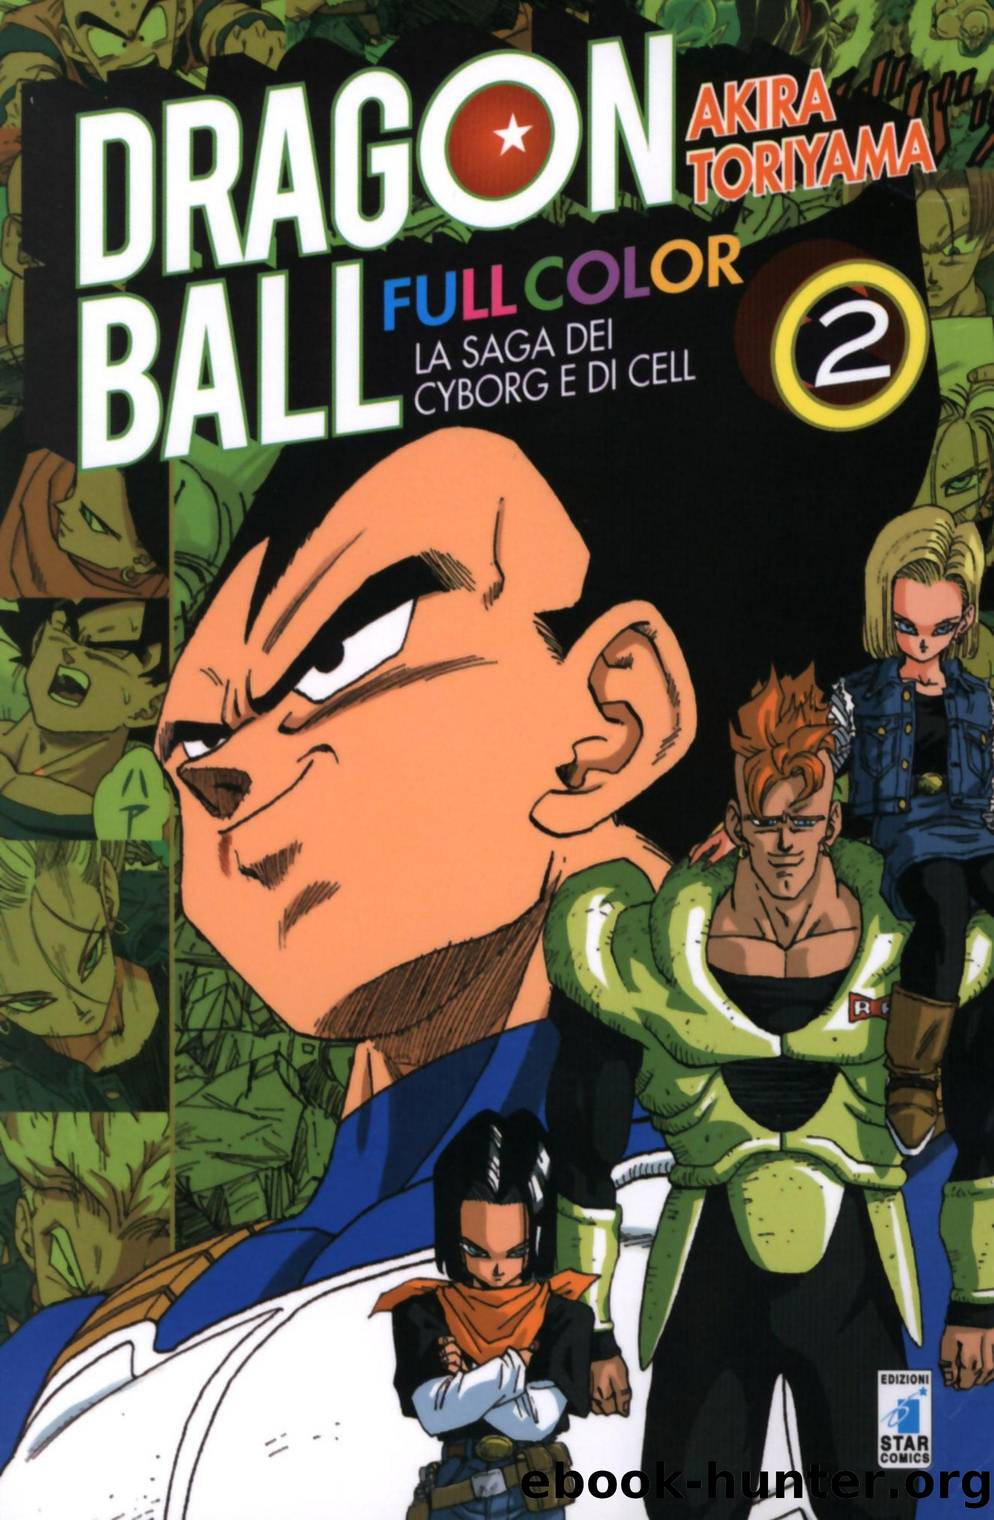 Dragon Ball Full Color [Volume 22] by Unknown